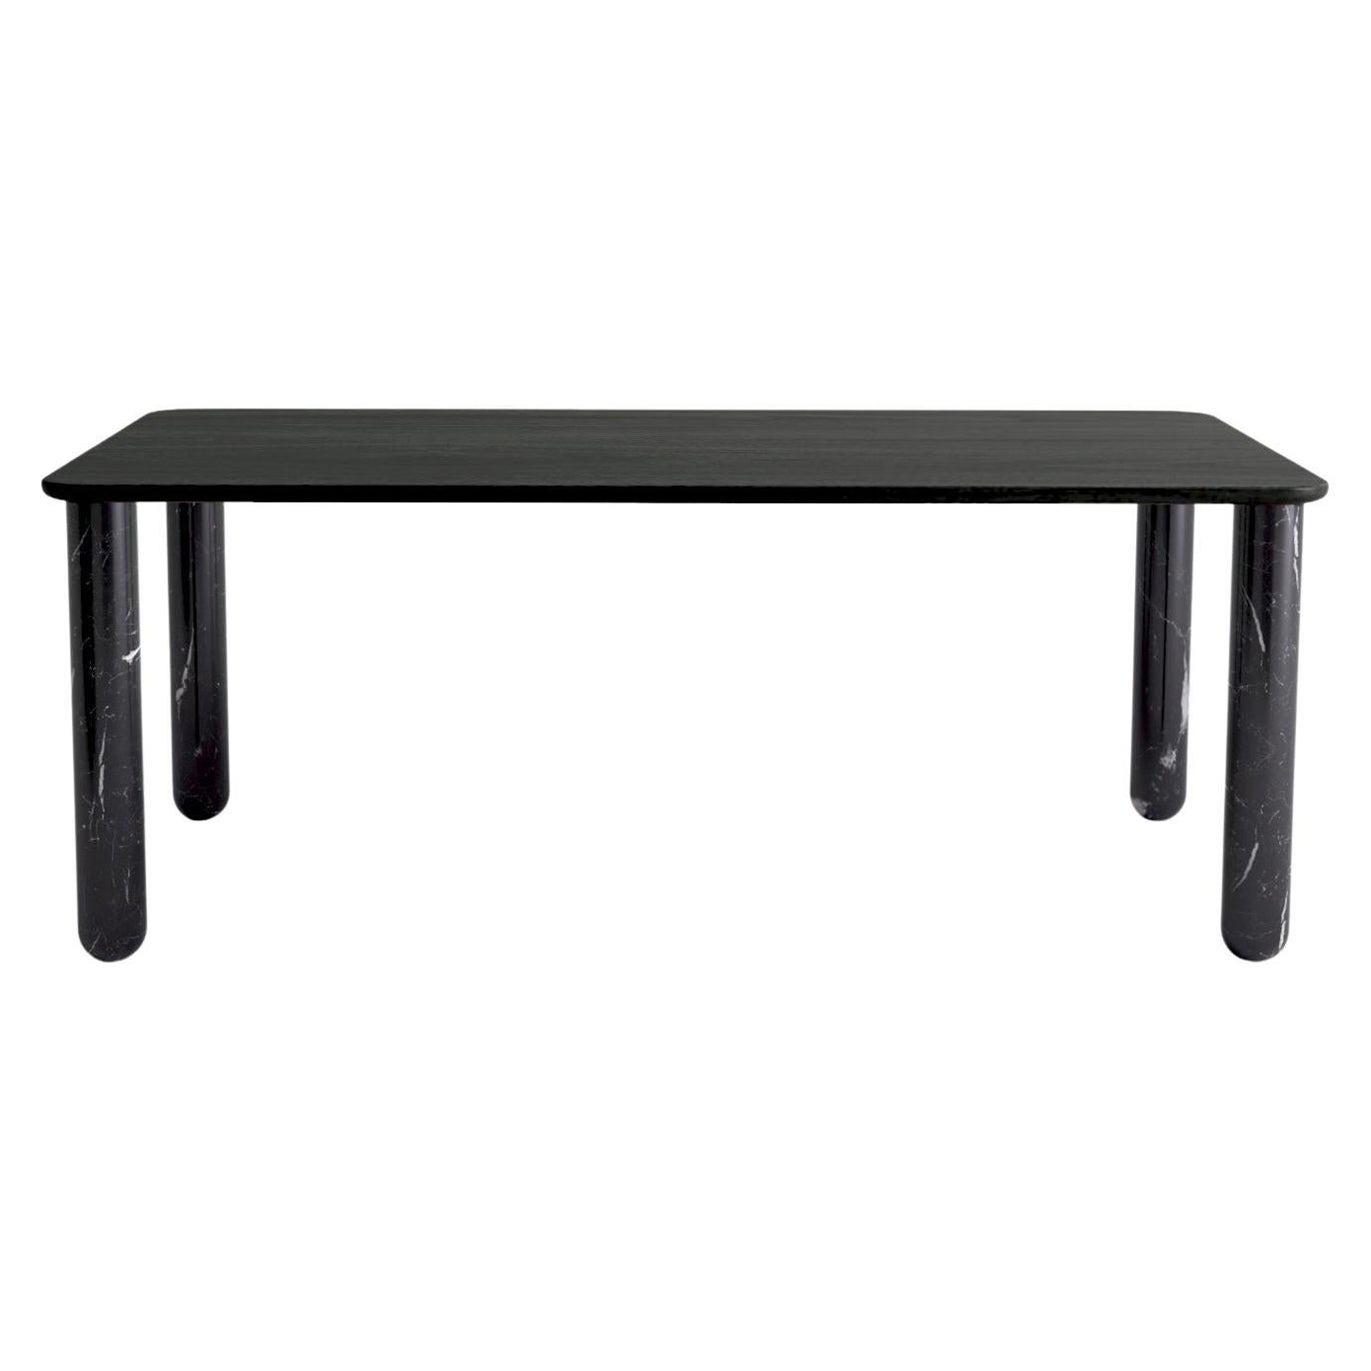 XLarge Black Wood and Black Marble "Sunday" Dining Table, Jean-Baptiste Souletie